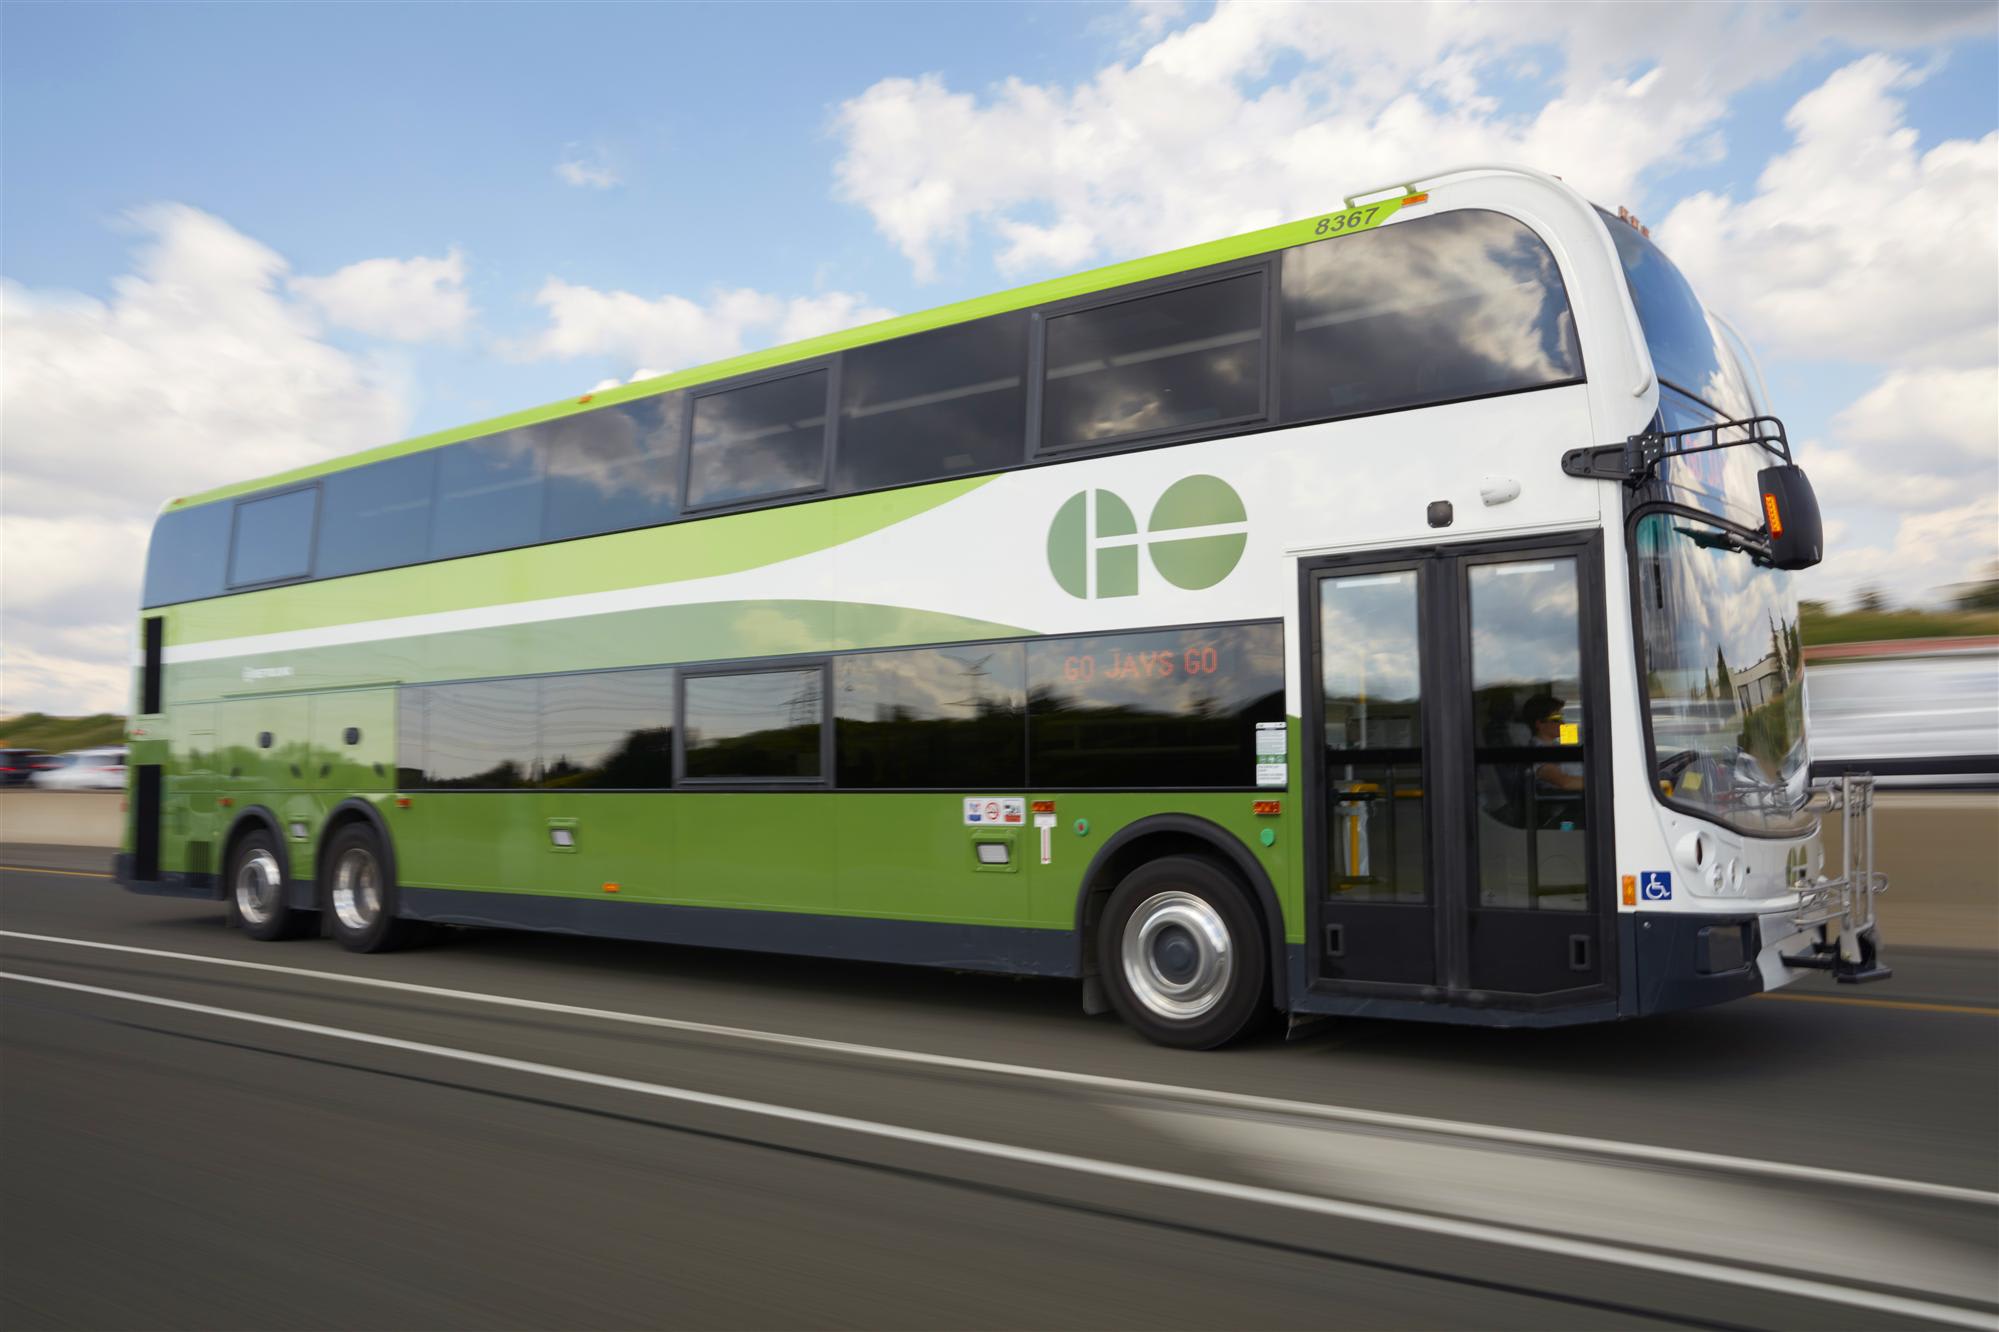 GO Bus stock images